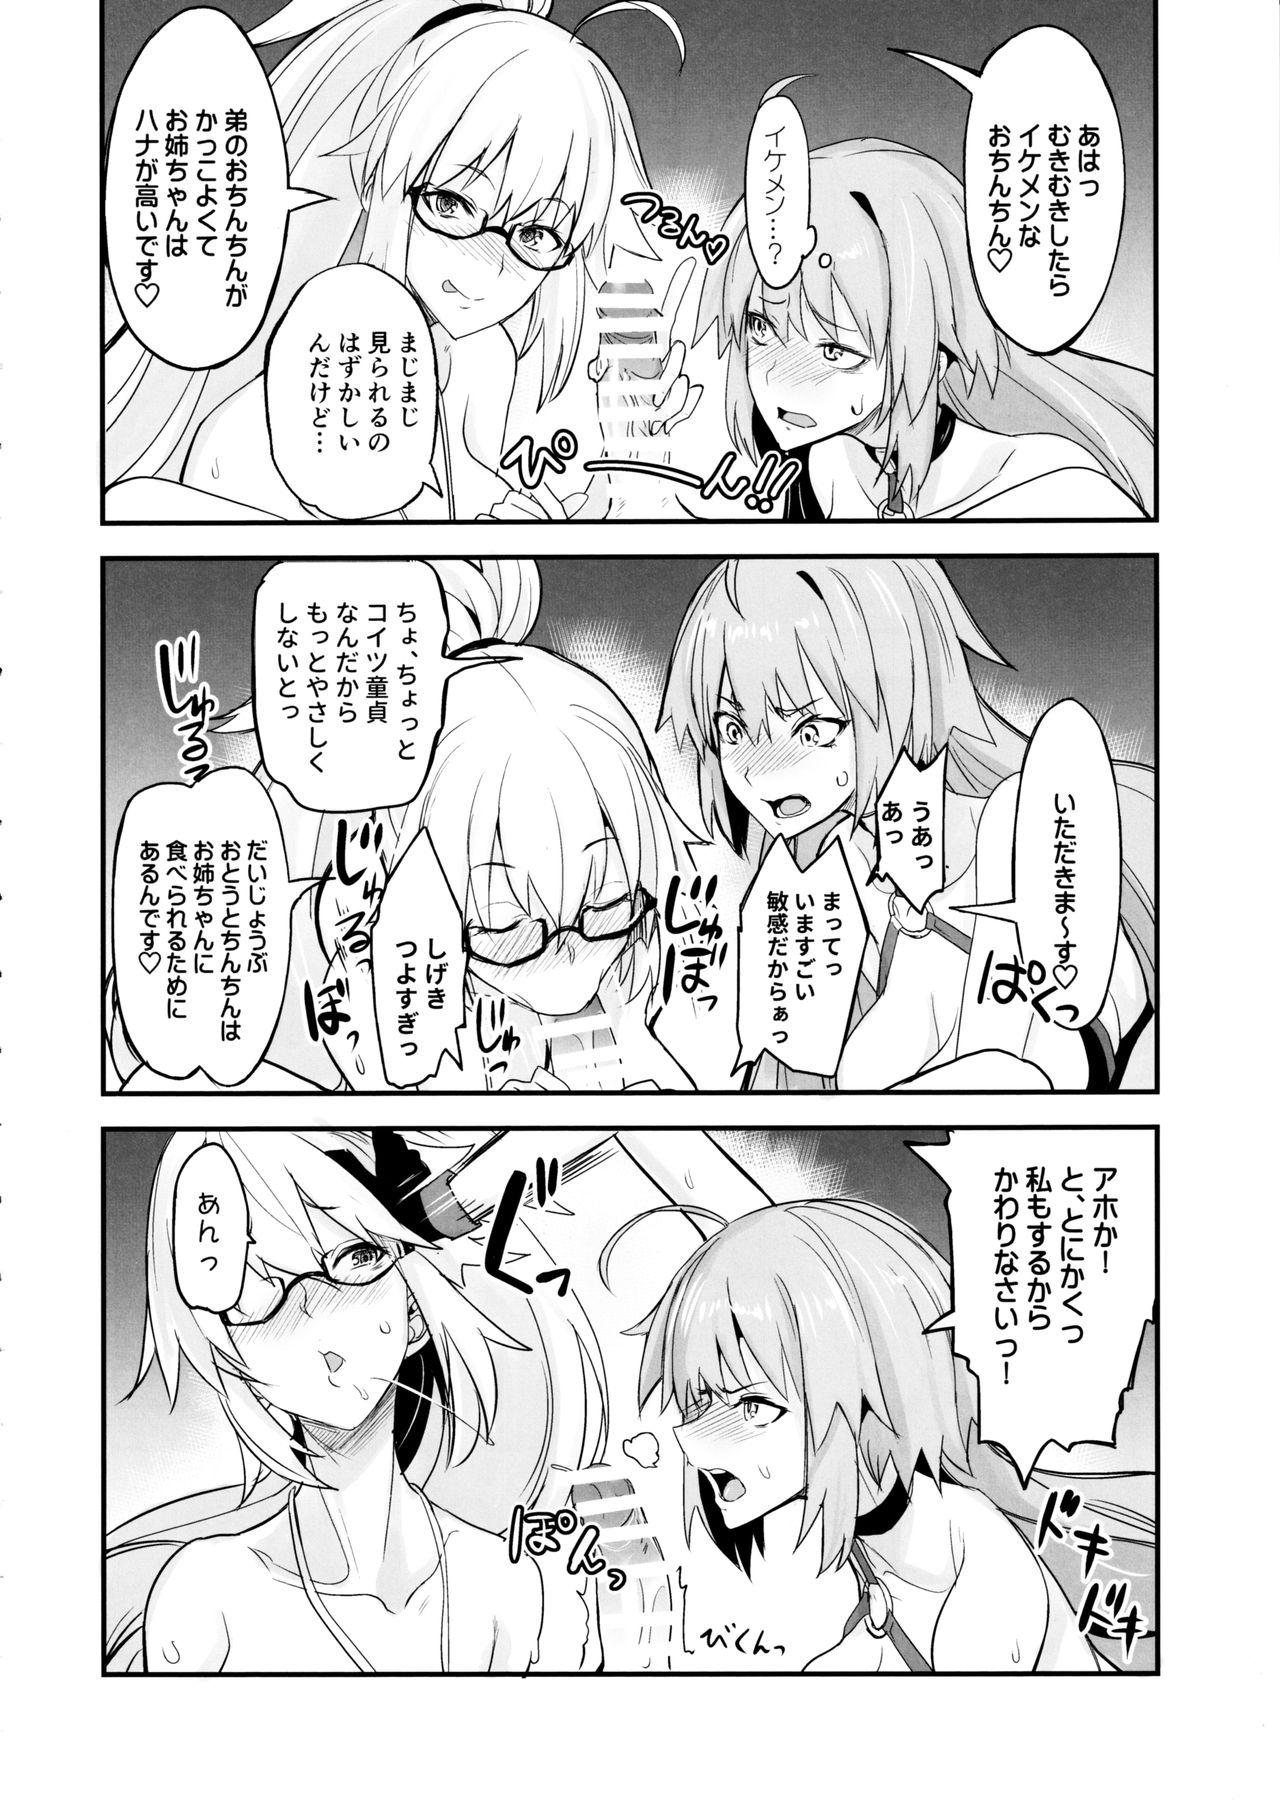 Anal W Jeanne vs Master - Fate grand order Tied - Page 9